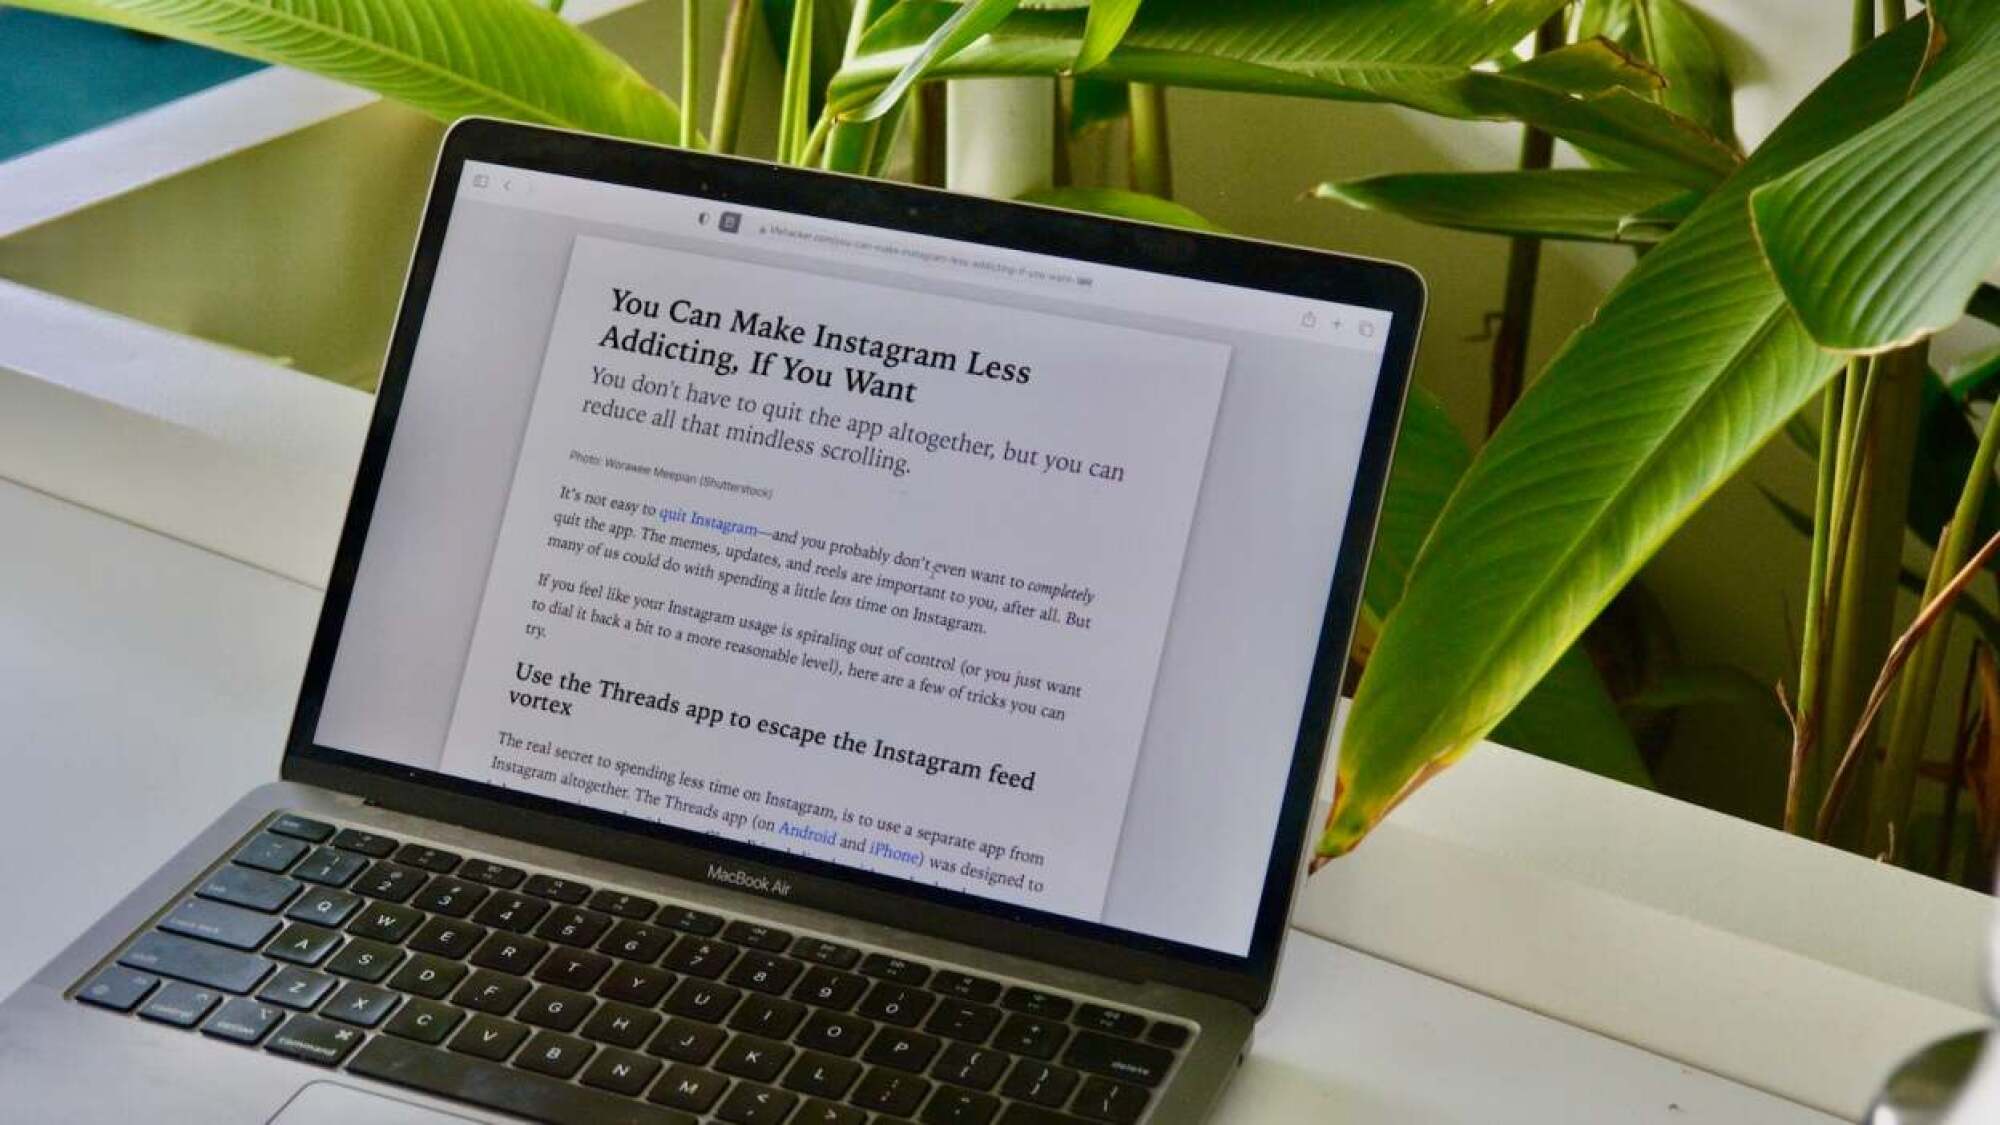 A MacBook on a desk surrounded by potted plants. The screen of the MacBook shows Reader mode open in Safari, on an article titled "How to make Instagram less addicting"